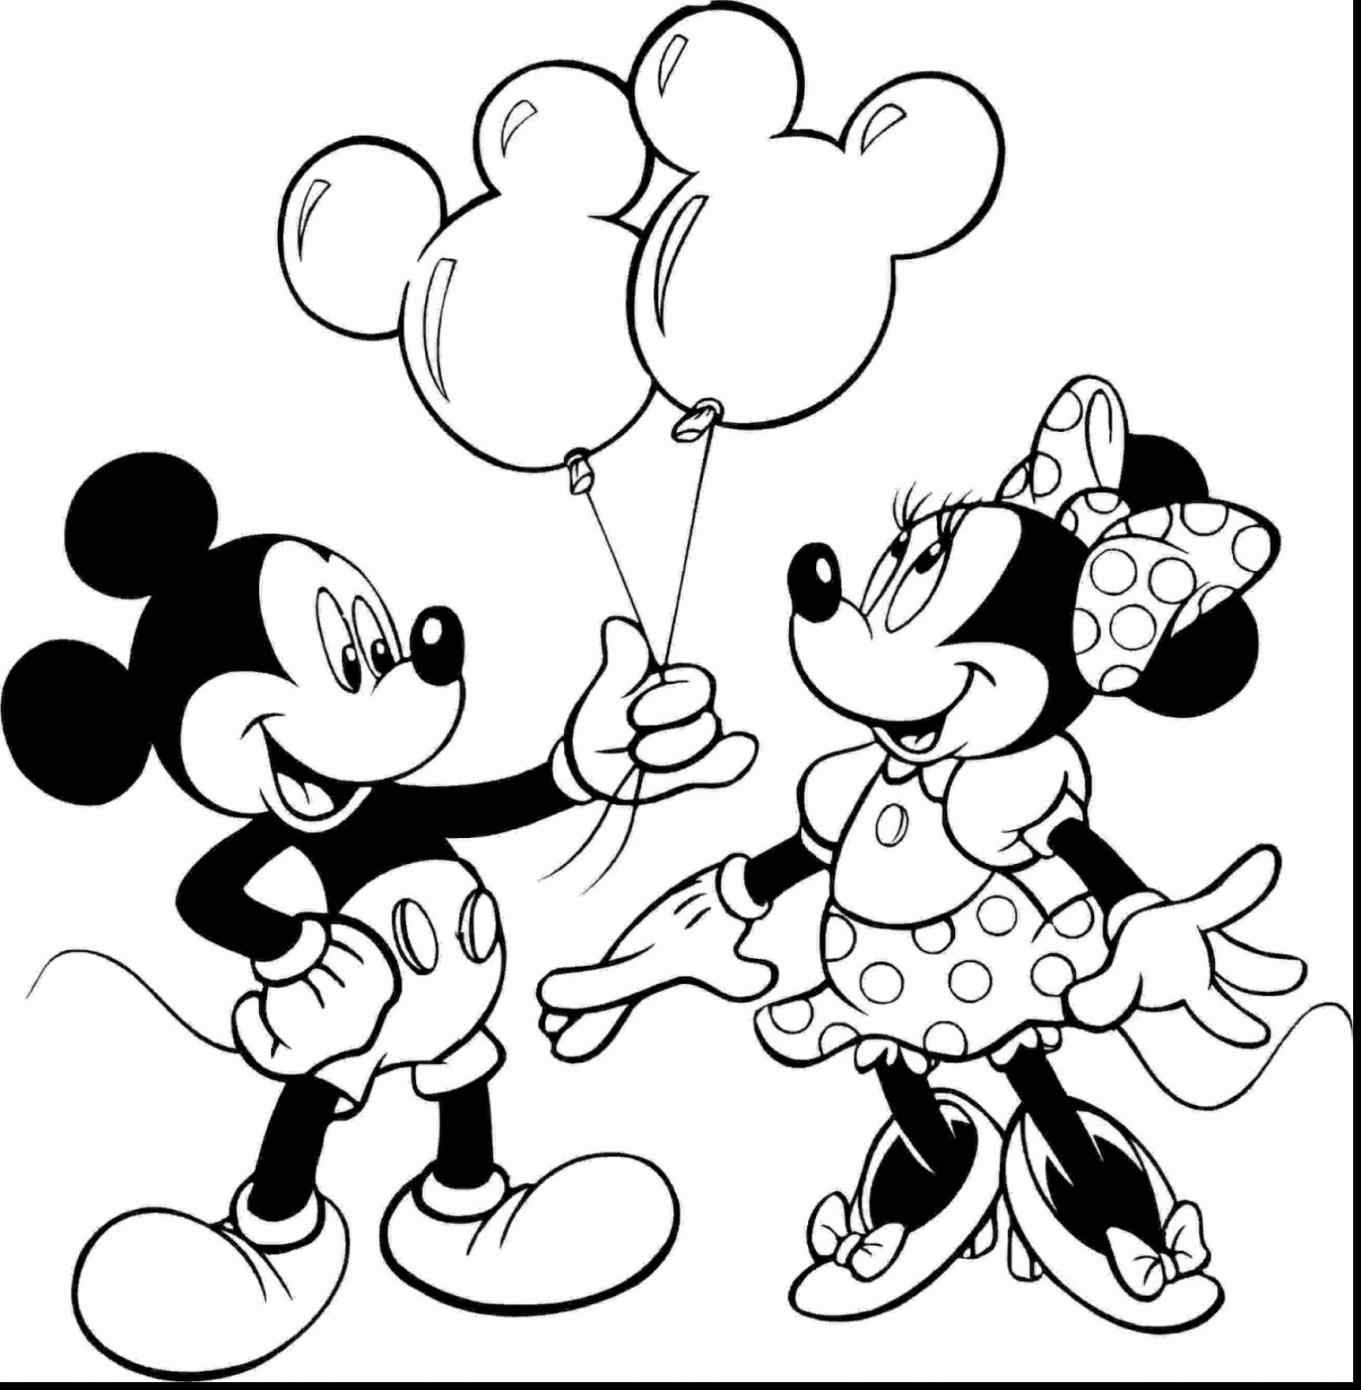 Mickey Mouse Birthday Coloring Pages at GetColorings.com | Free